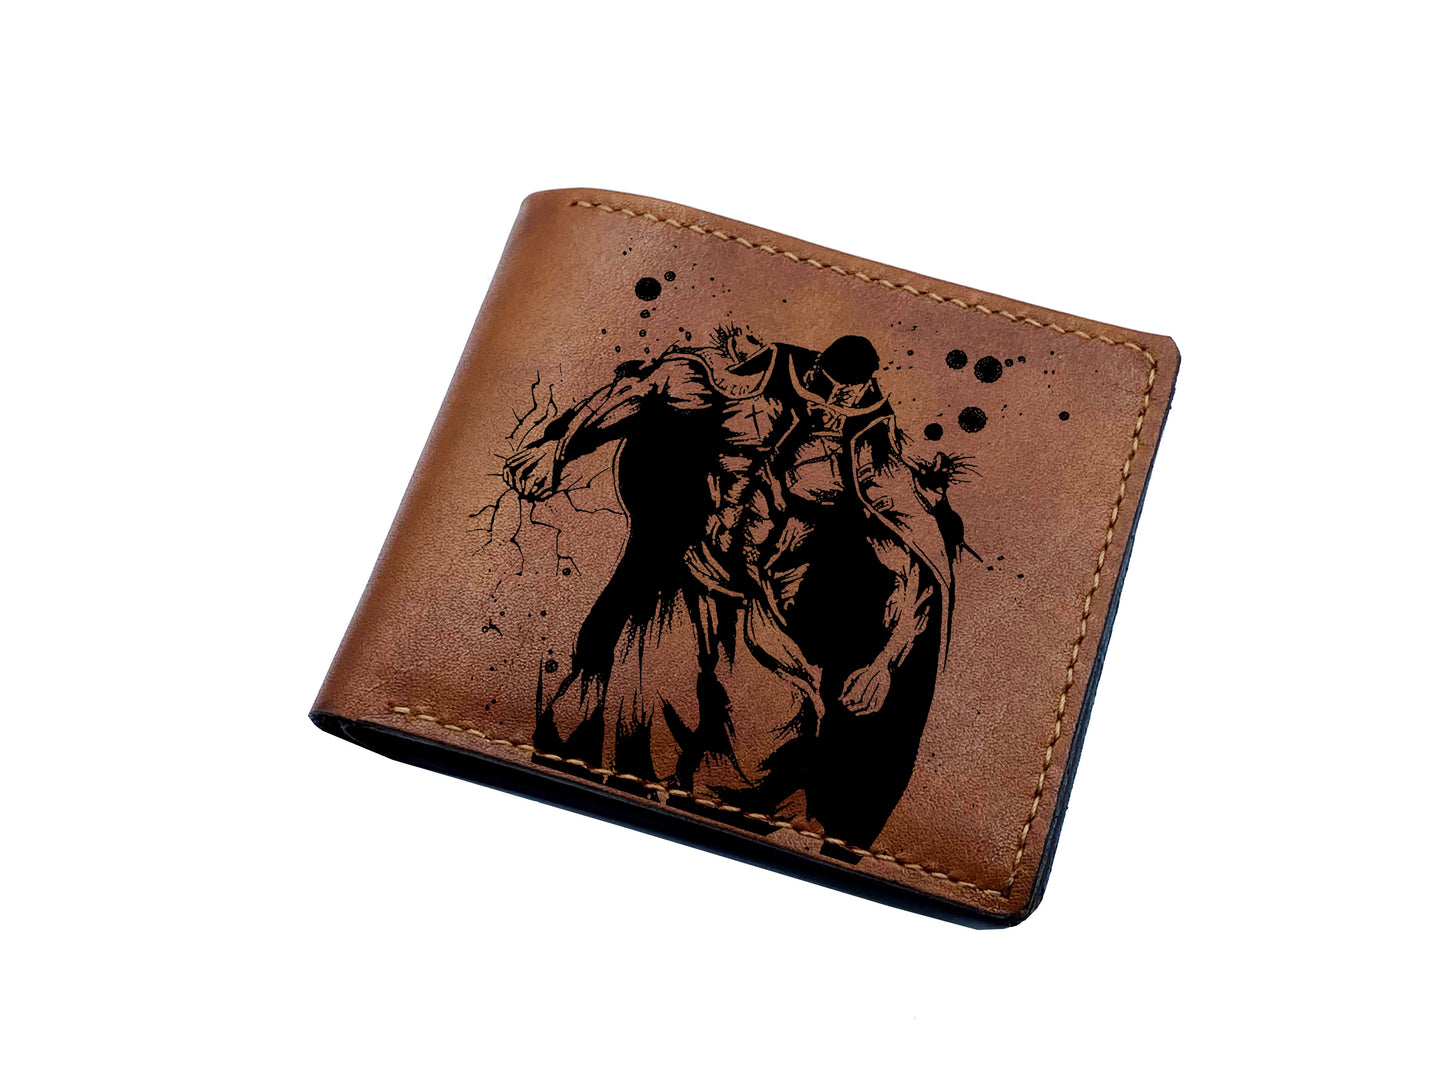 Mayan Corner - One Piece anime leather wallet, bifold anime wallet, custom leather gift for boyfriend, cool wallet for father, husband